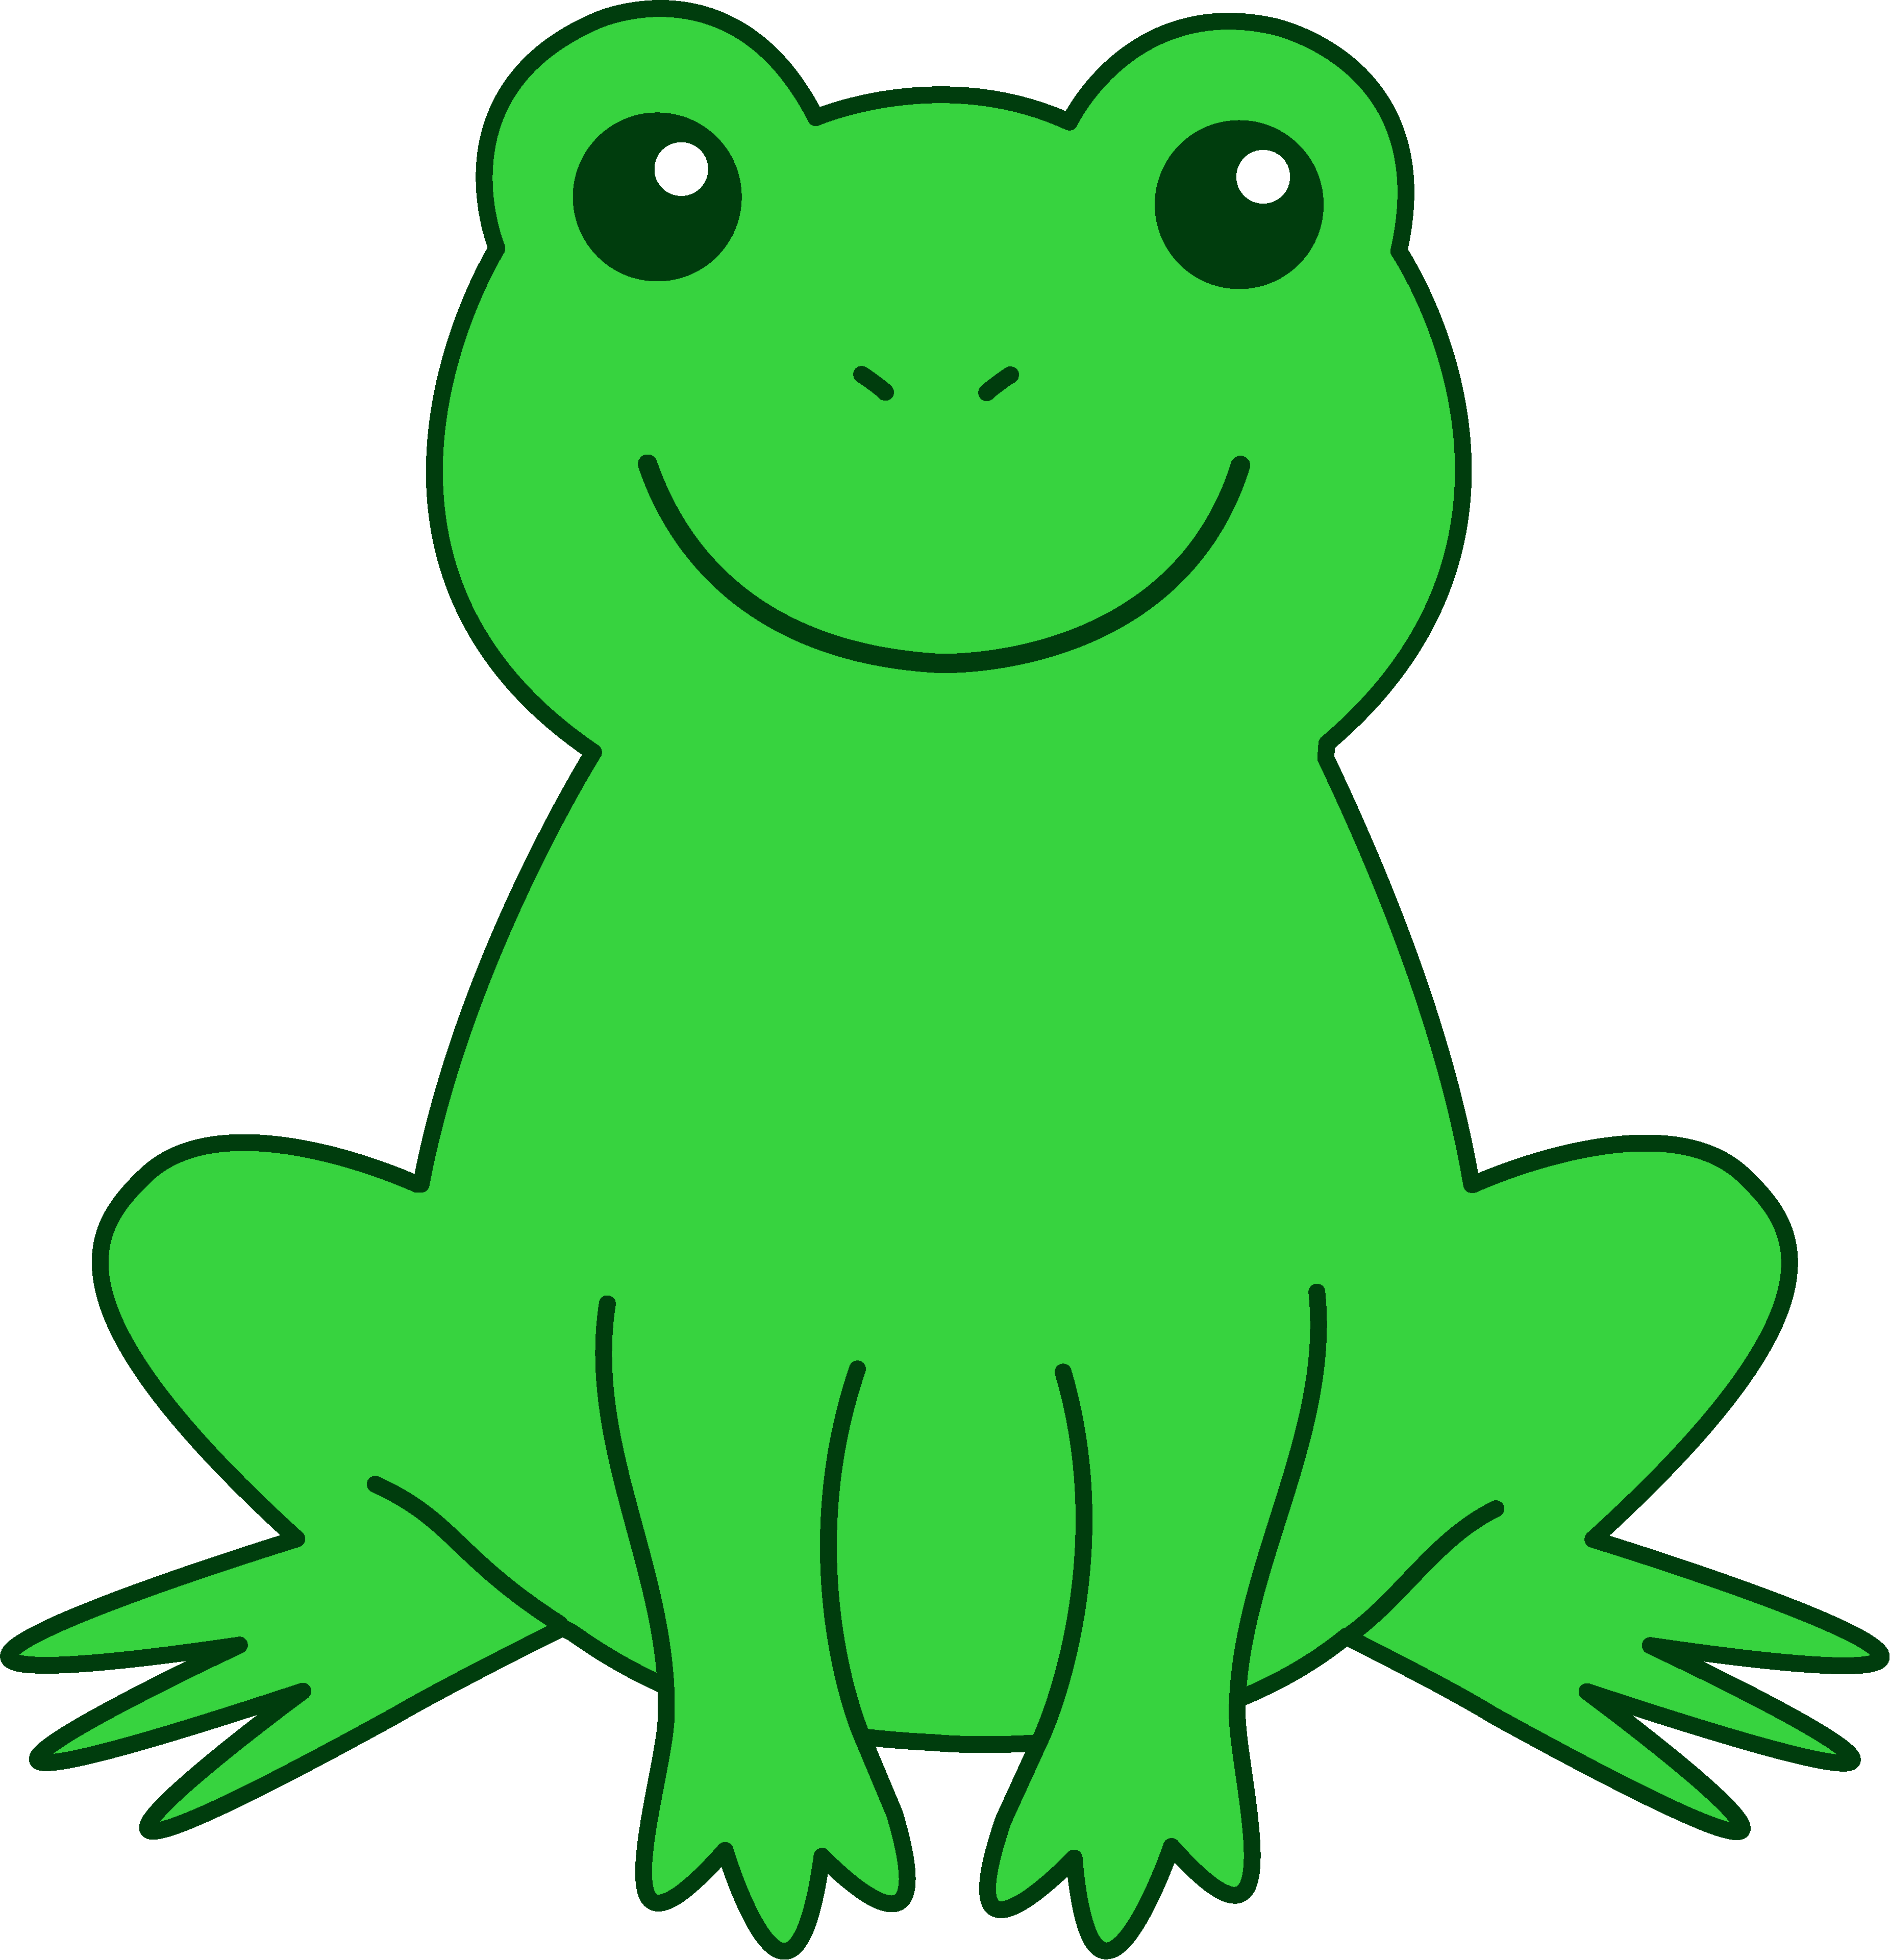 Frog clip art for teachers free clipart images